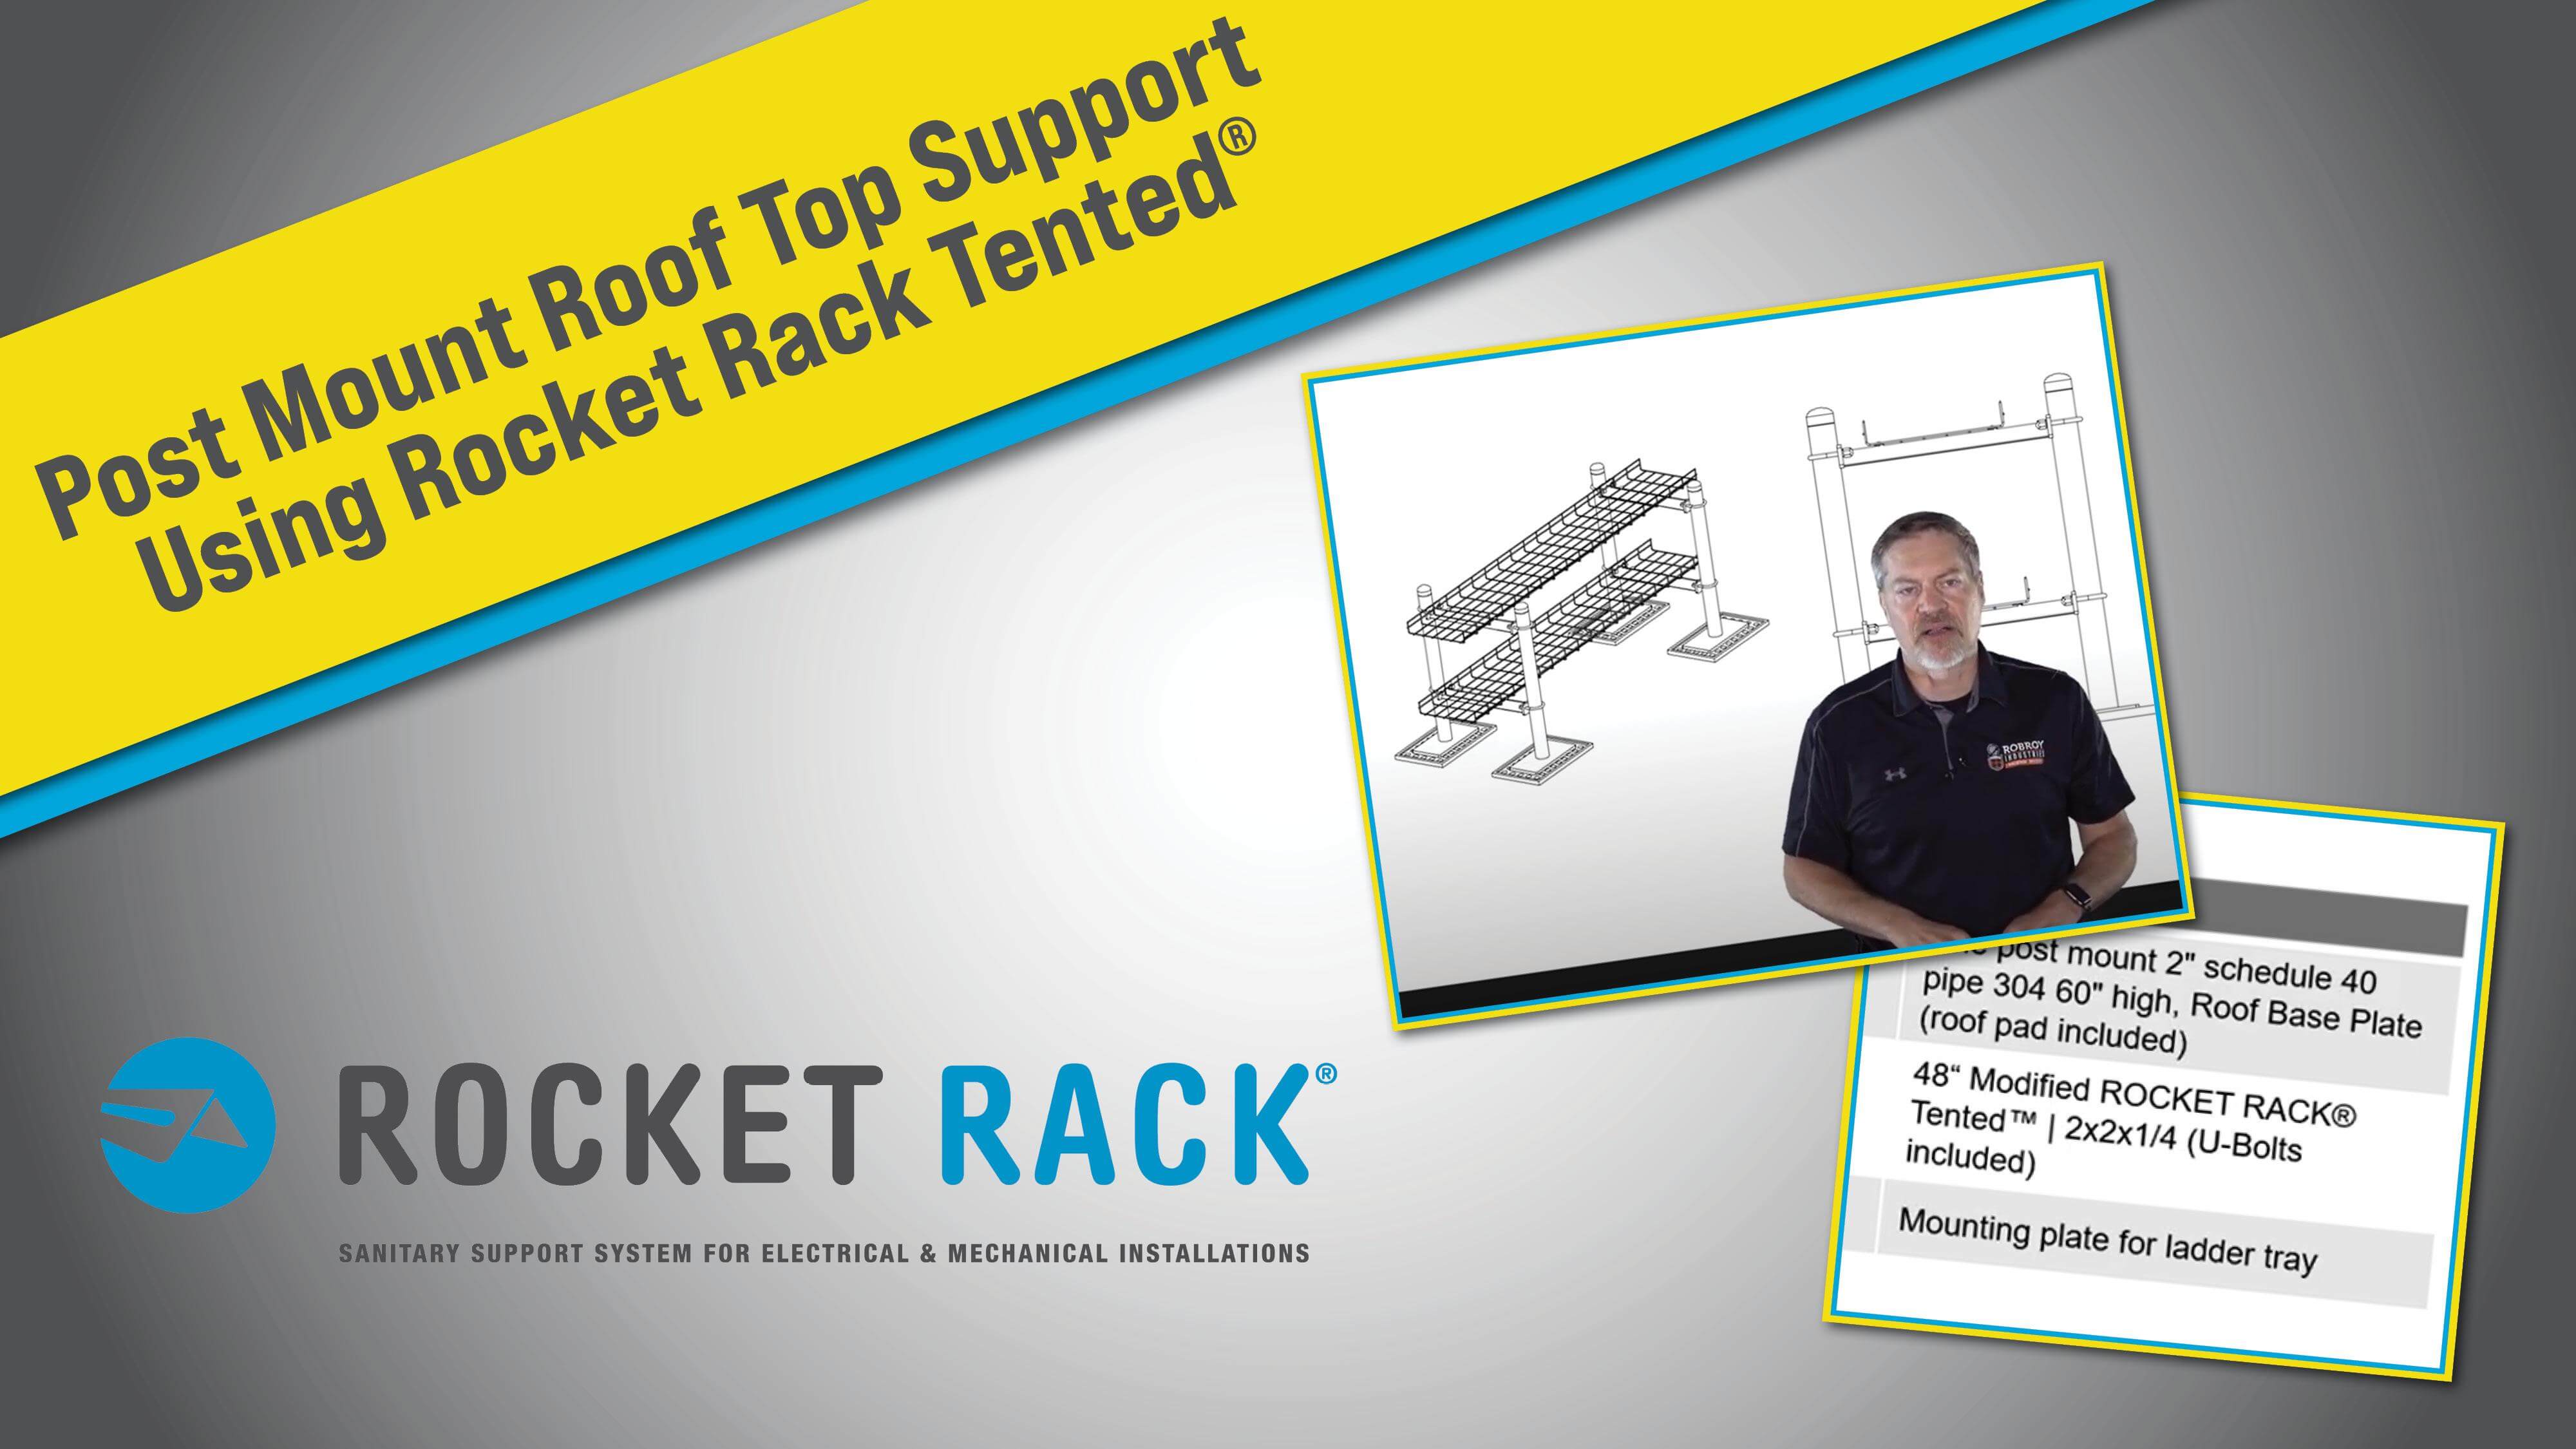 Rocket Rack How To--Tented Roof Top Post Mount Thumbnail